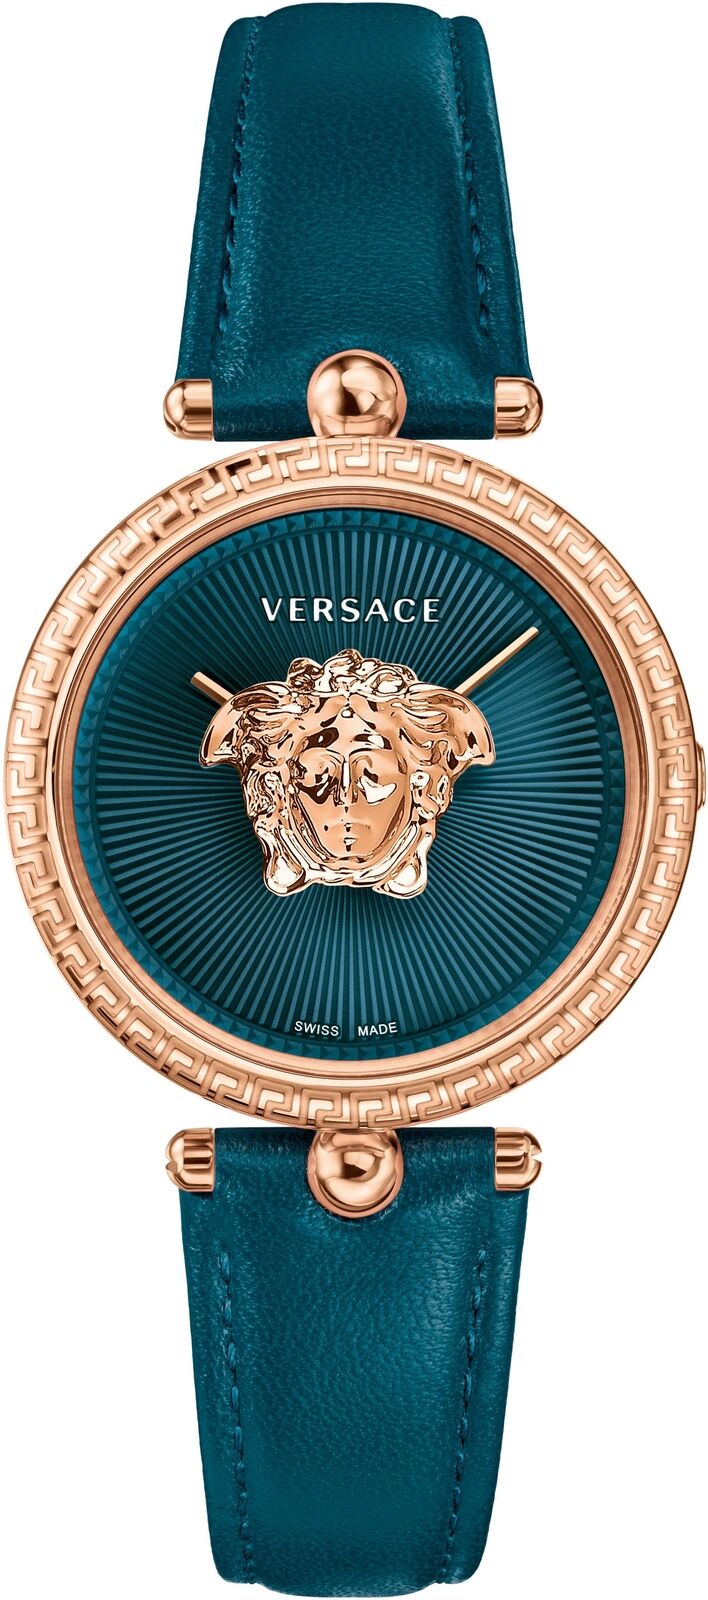 Versace Ladies Watch Palazzo Empire 34mm Teal Rose Gold VECQ00318